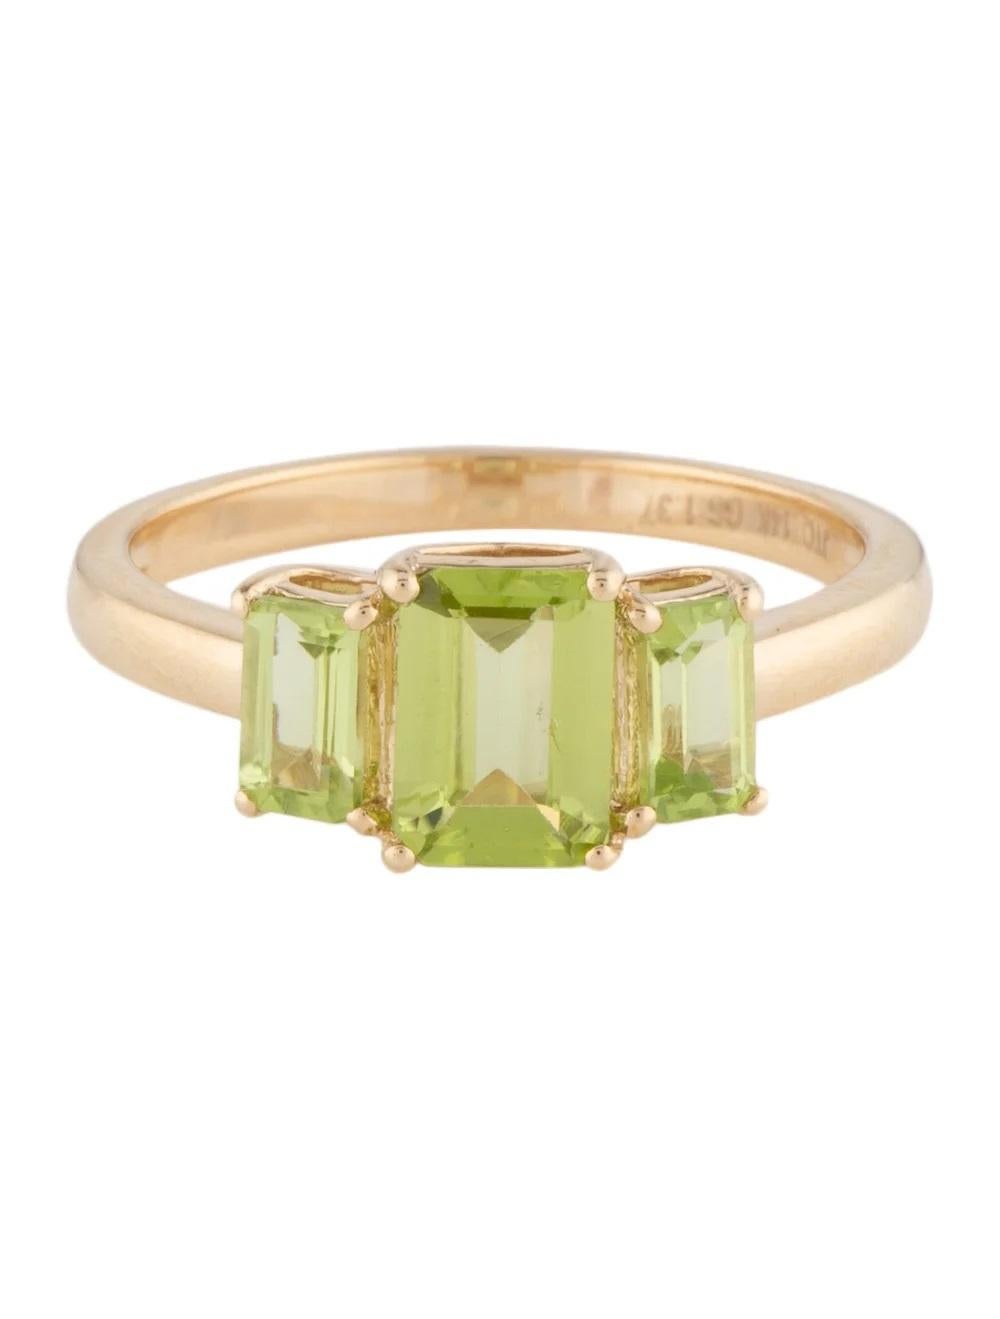 Emerald Cut 14K Peridot Cocktail Ring 1.37ctw Green Gemstone Yellow Gold Size 6.75 - Luxury For Sale